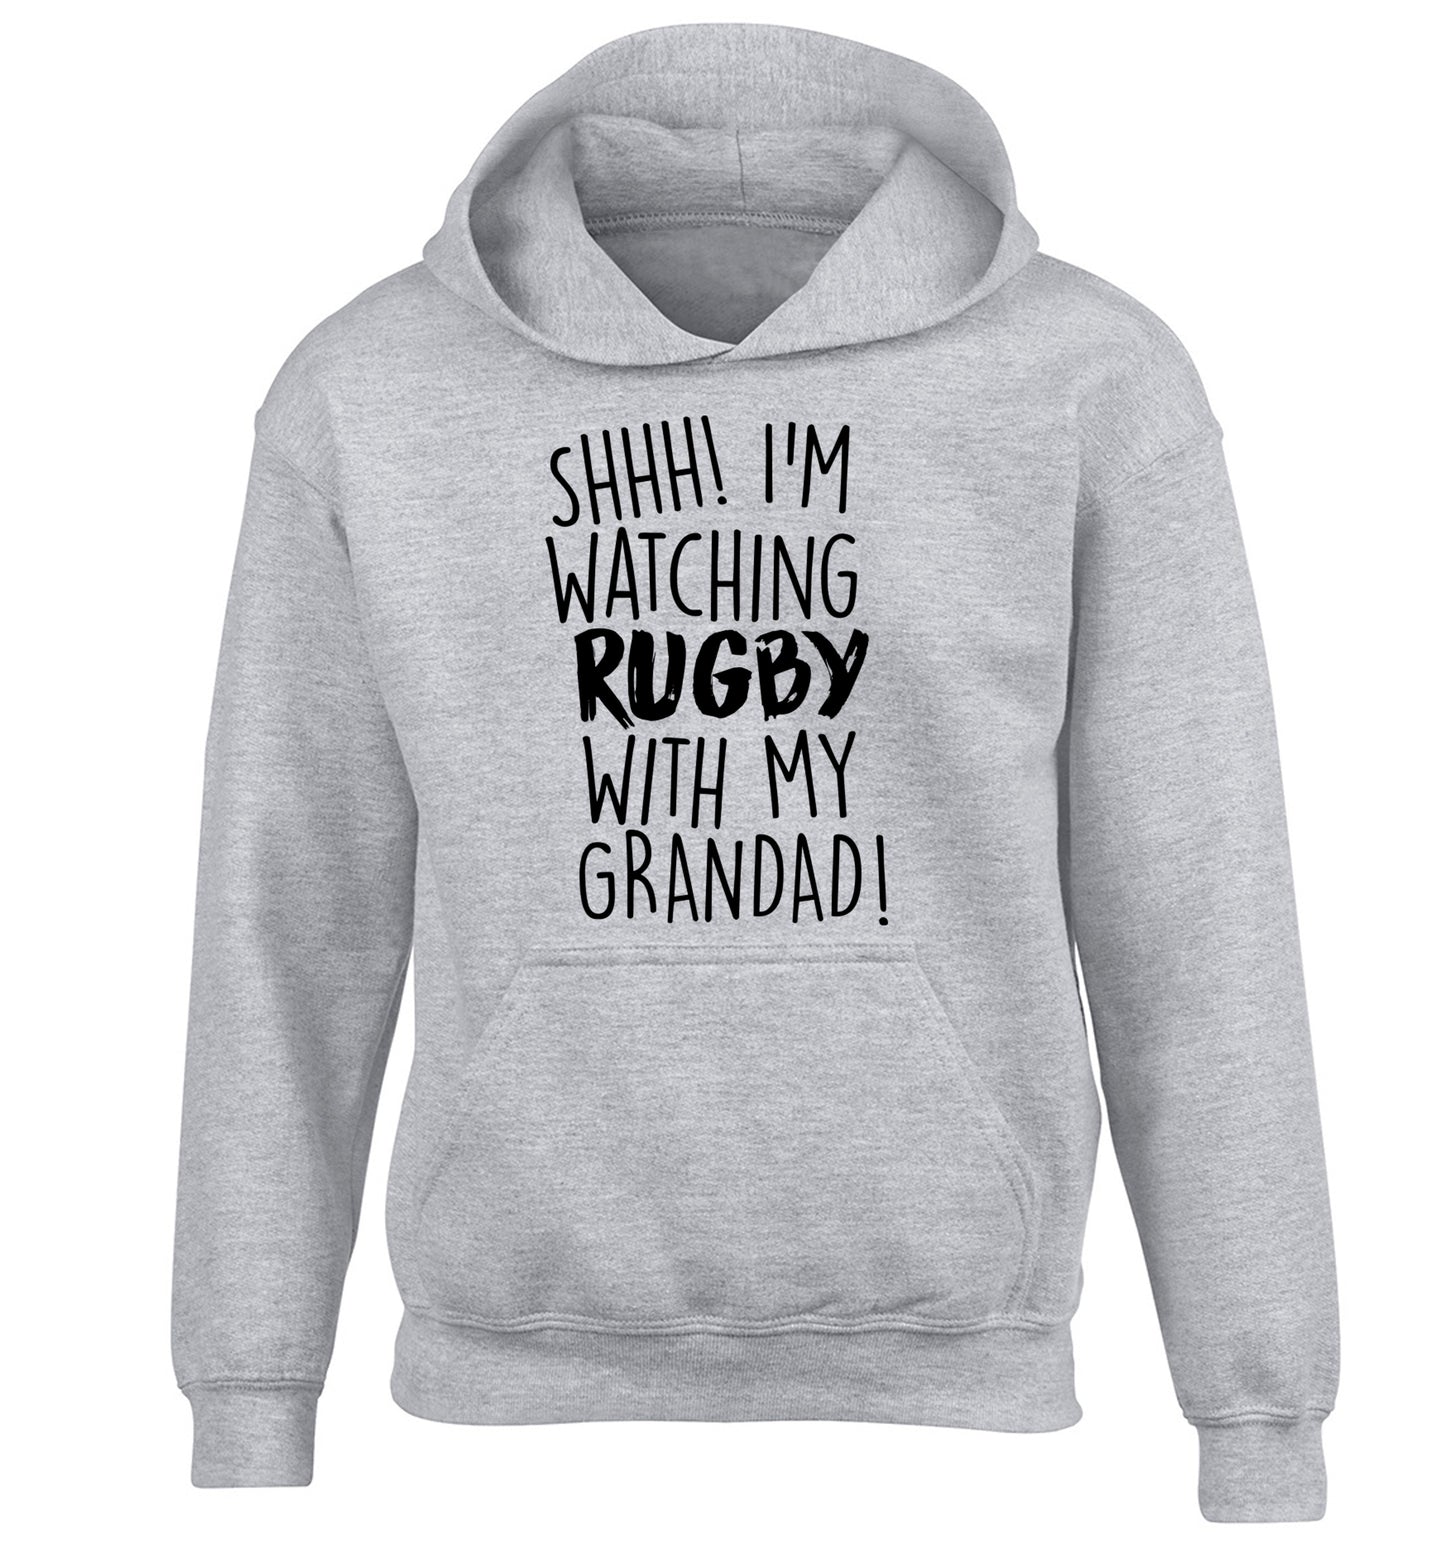 Shh I'm watching rugby with my grandaughter children's grey hoodie 12-13 Years